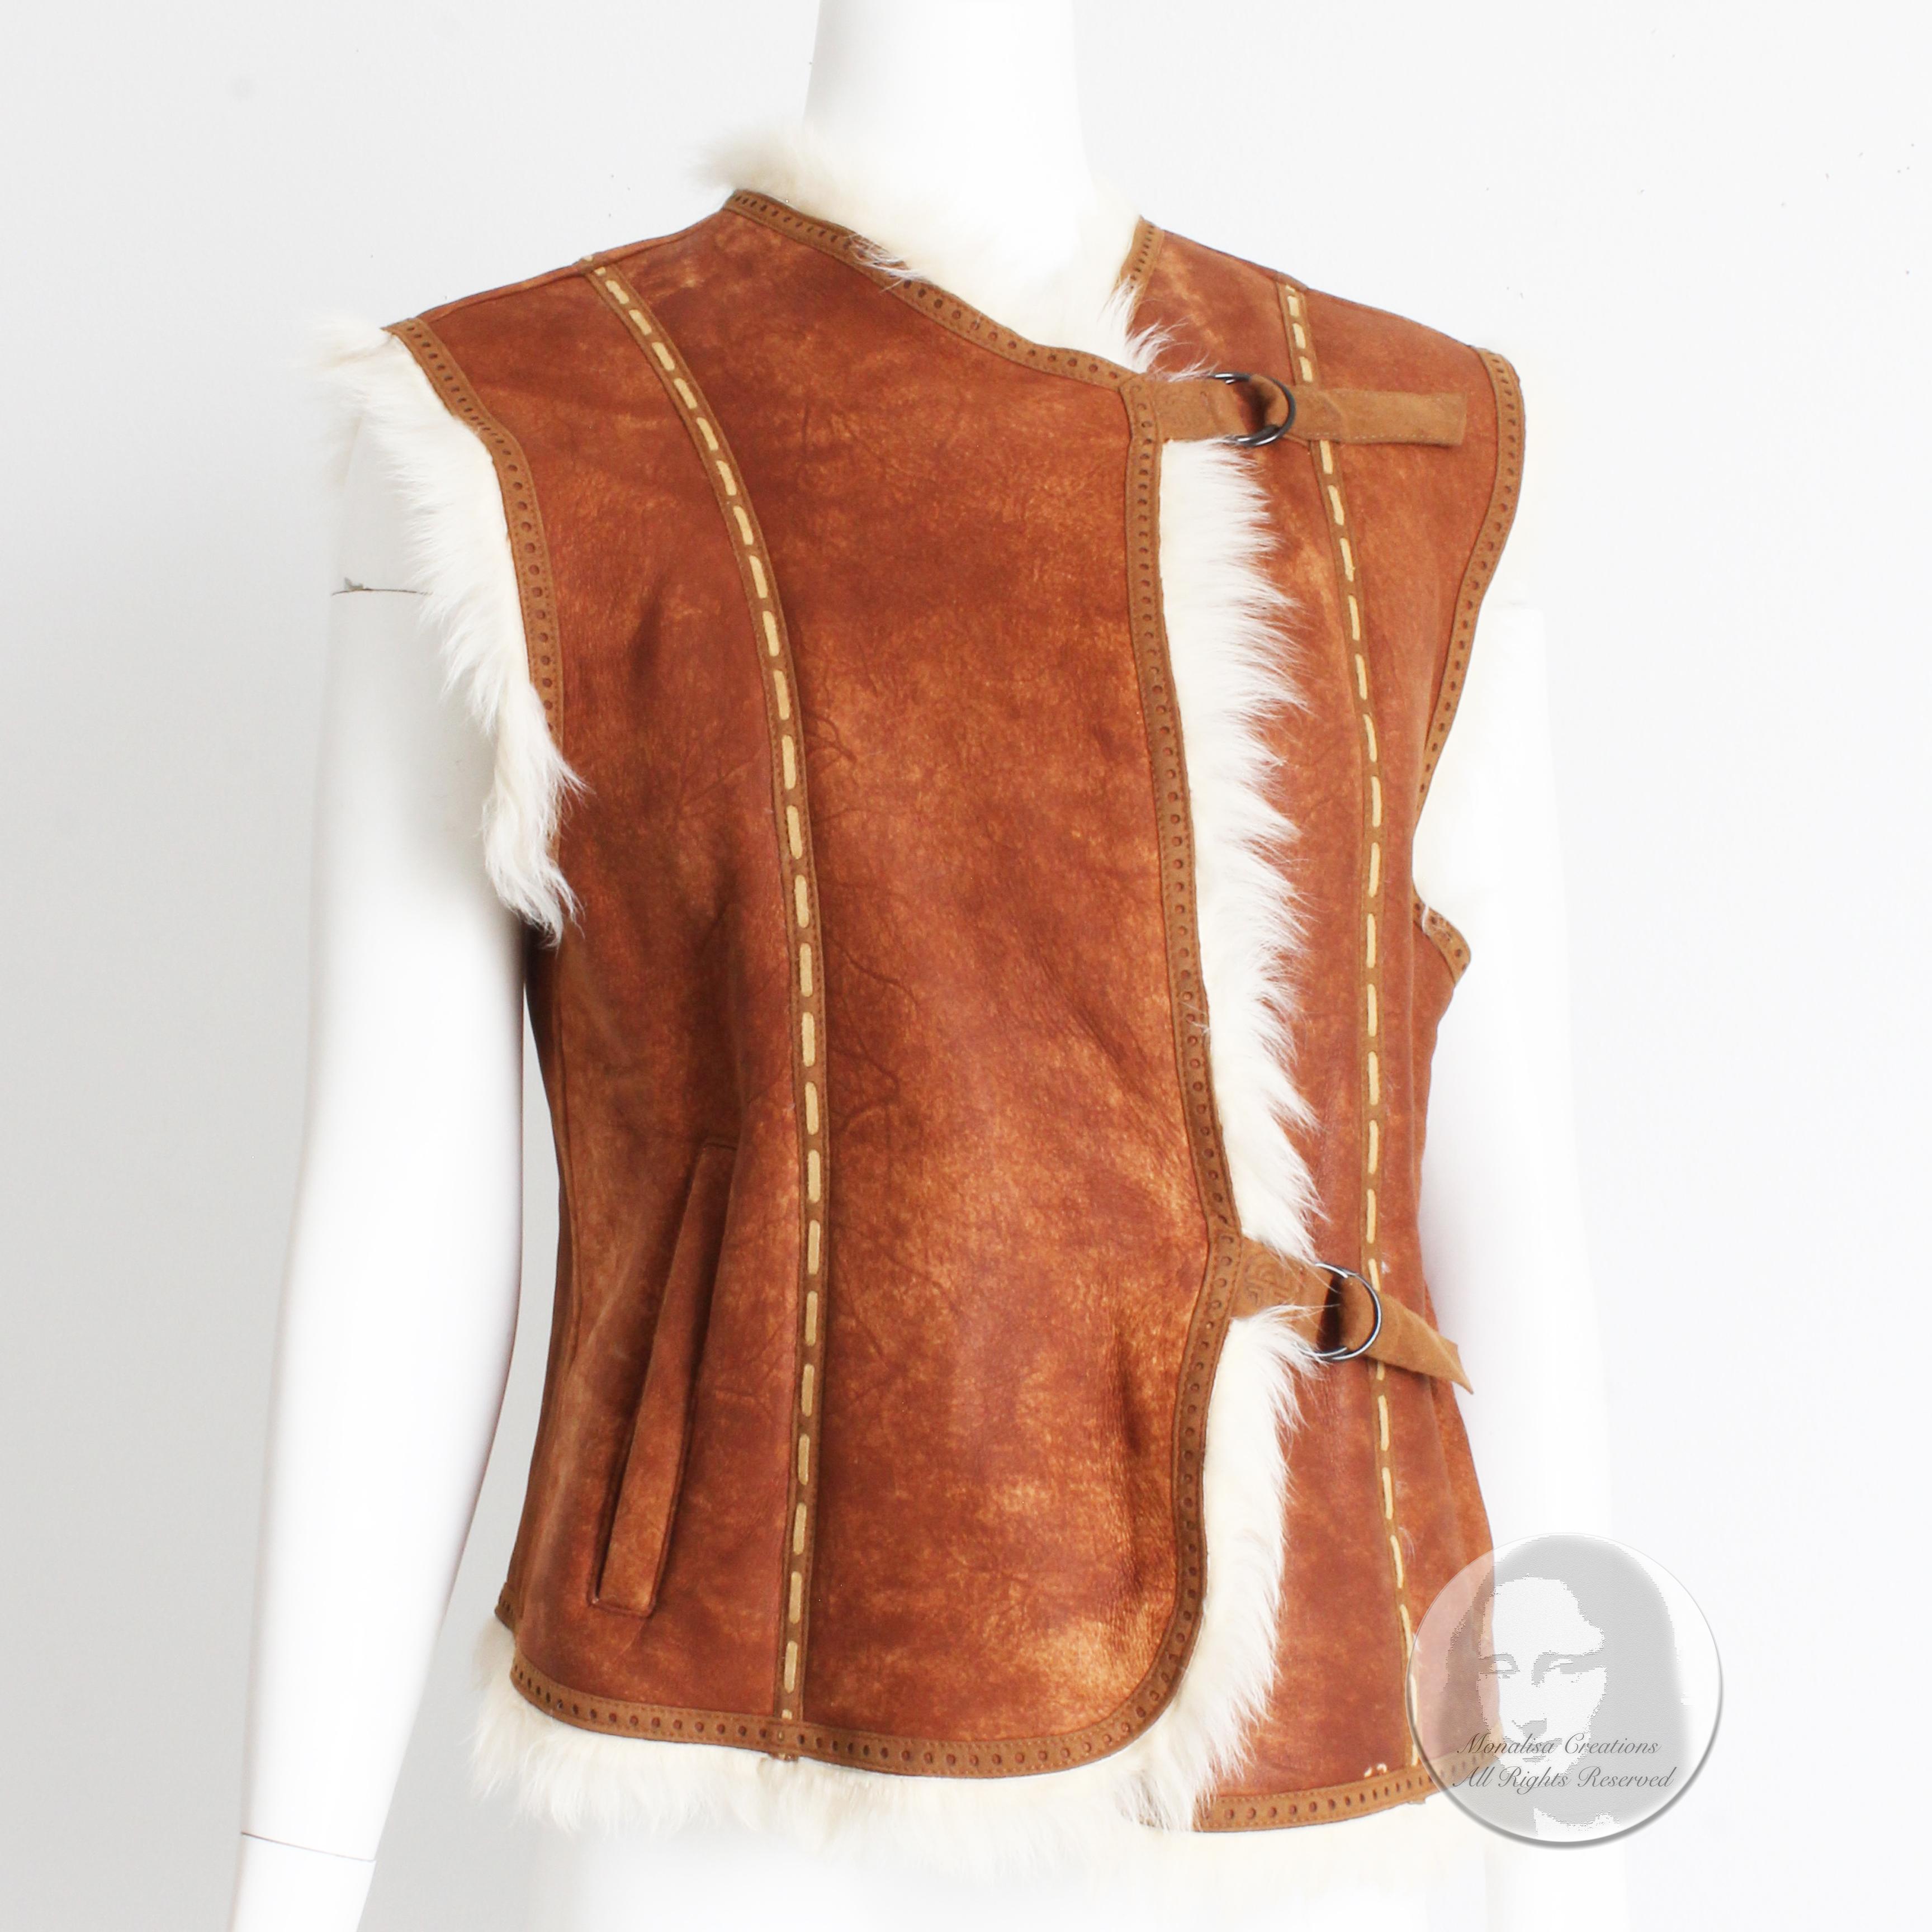 Preowned, vintage Louis Feraud shearling vest with contrast whipstitching, likely made in Canada in the early 2000s. 

Made from rust-hued brown shearling, it fastens with suede straps and rings and has slash pockets at each side. The white